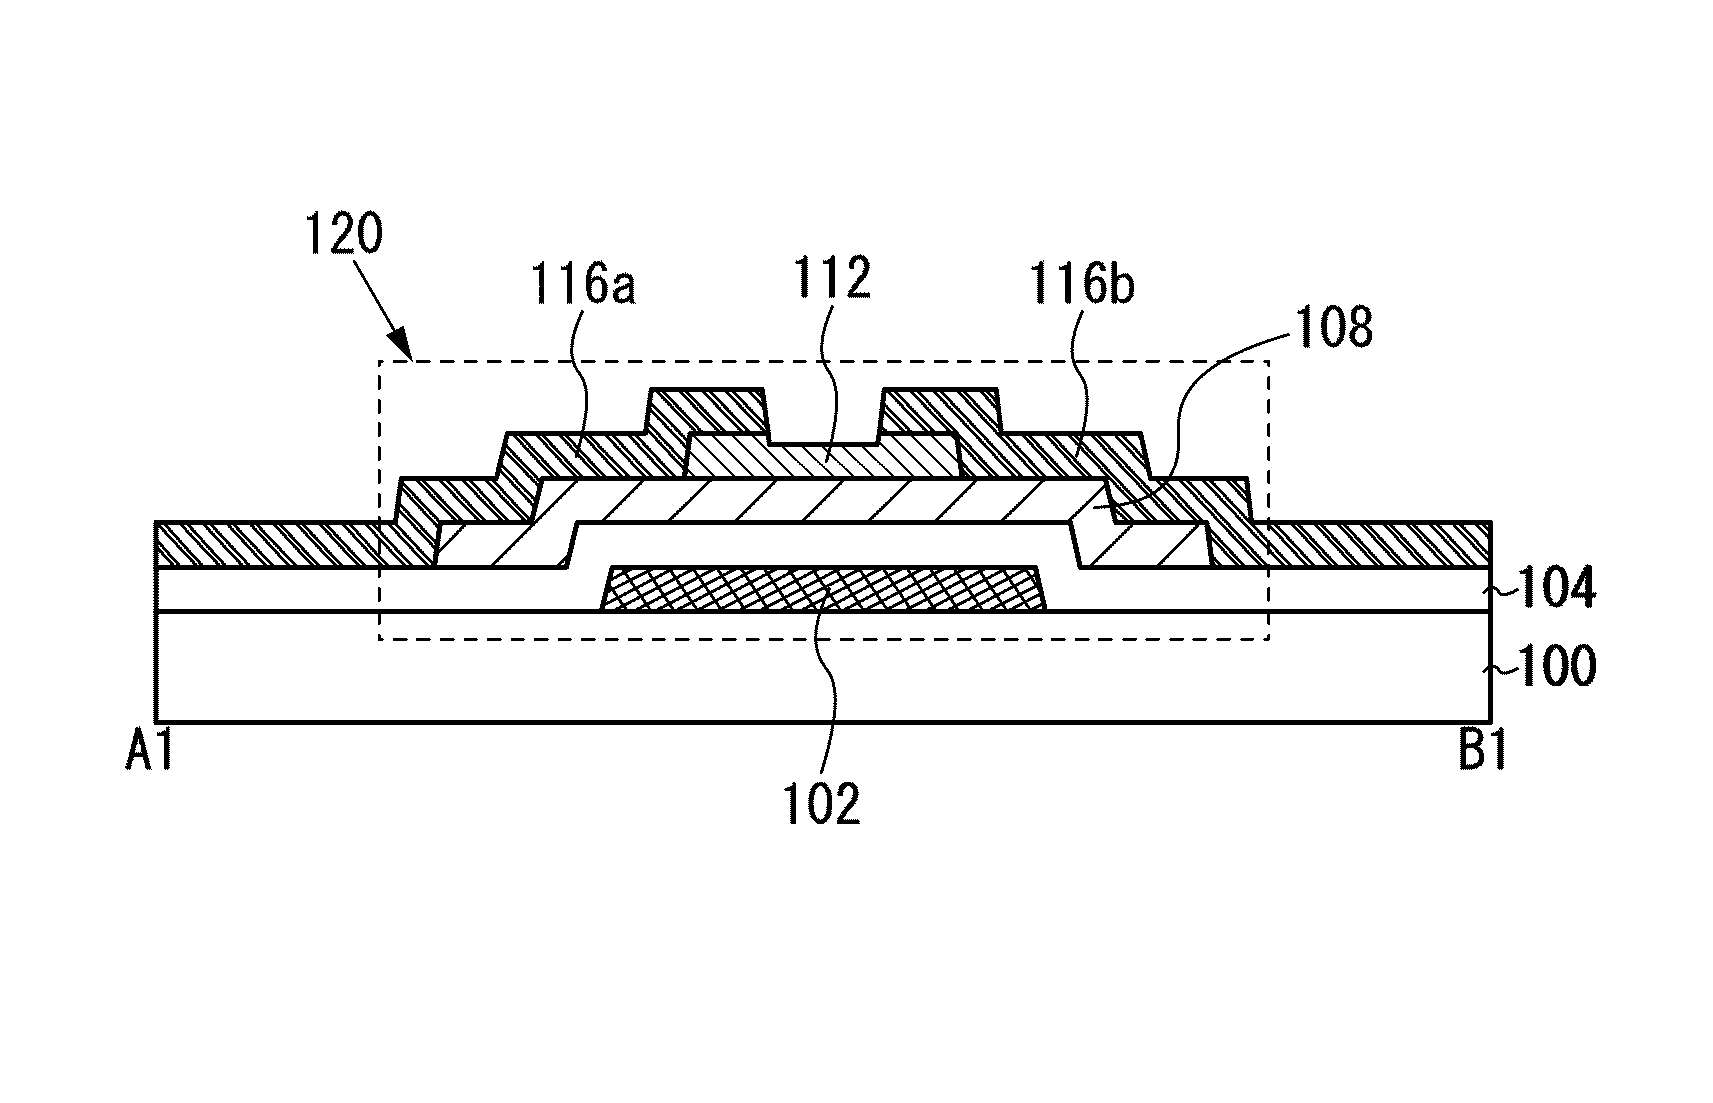 Semiconductor device including a transistor, and manufacturing method of the semiconductor device